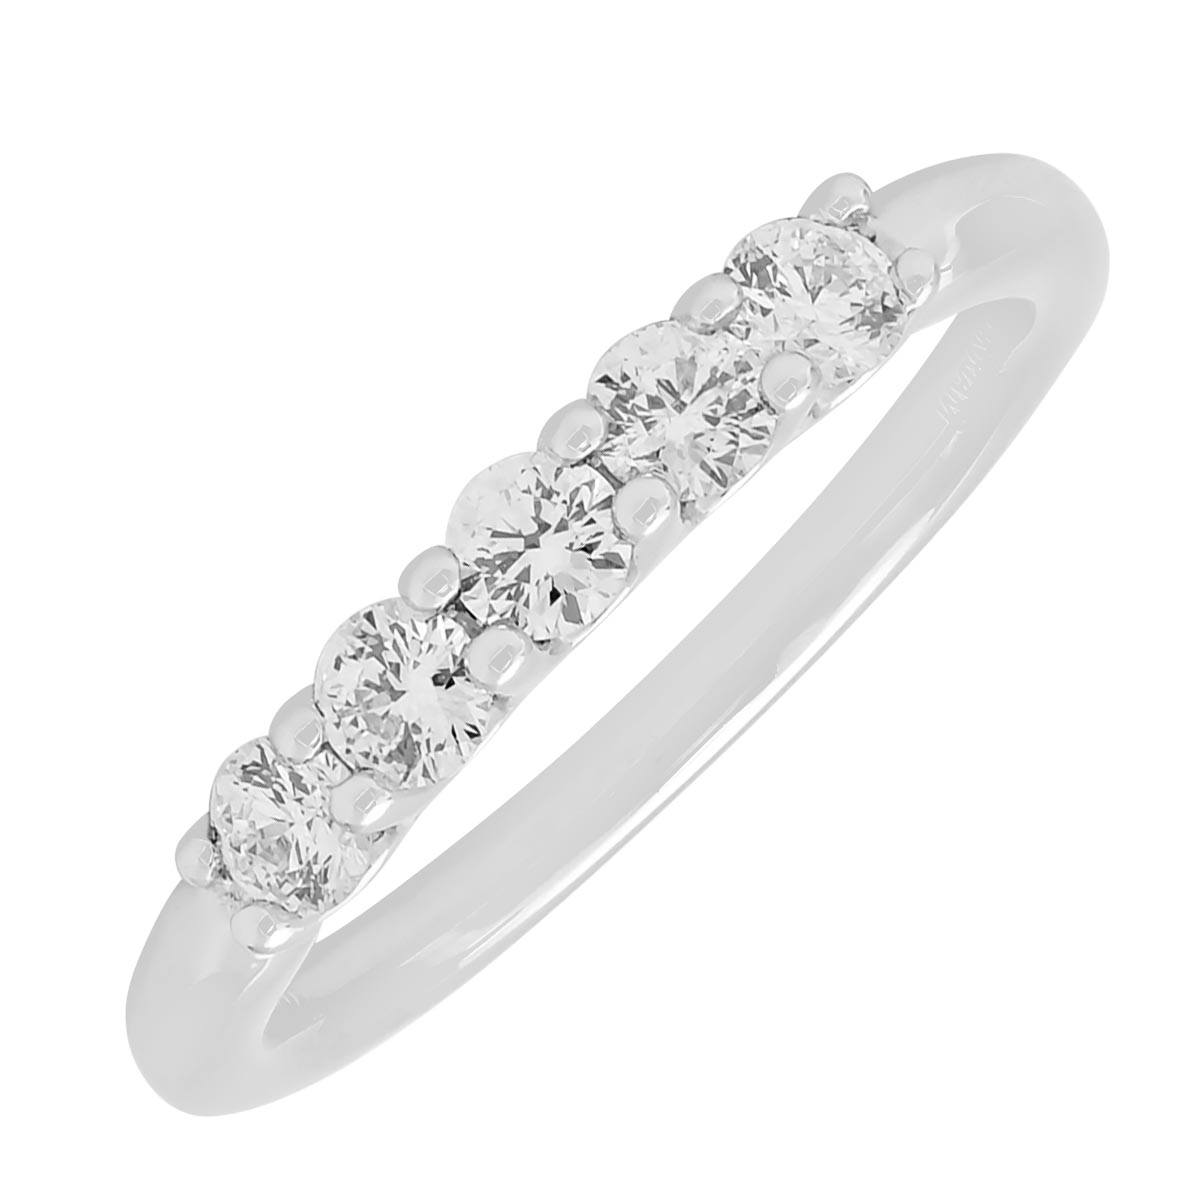 Northern Star Five Diamond Band in 14kt White Gold (1/2ct tw)